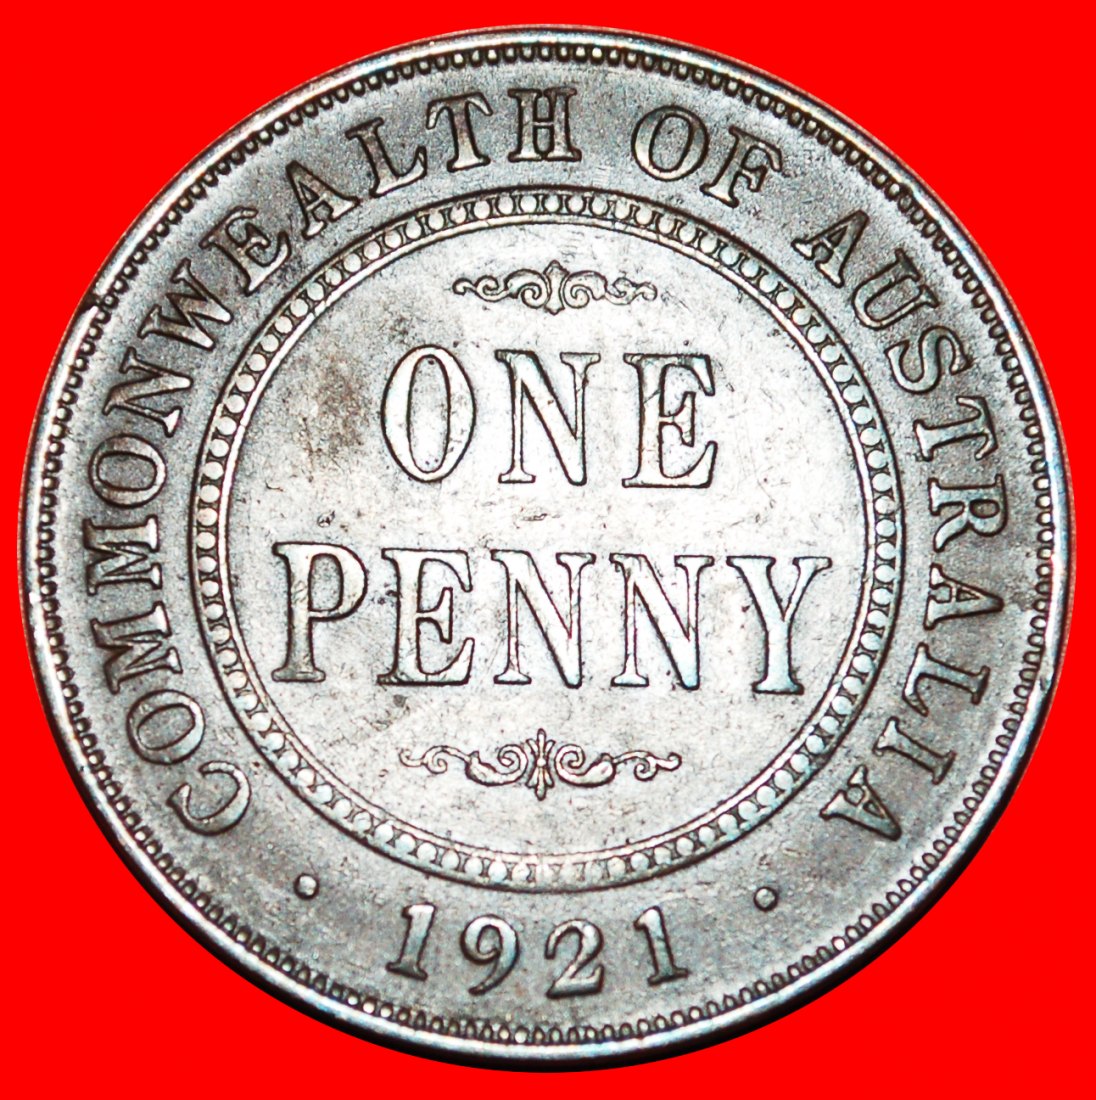  * INDIA/GREAT BRITAIN DIES: AUSTRALIA ★ 1 PENNY 1921! George V (1911-1936) LOW START ★ NO RESERVE!   